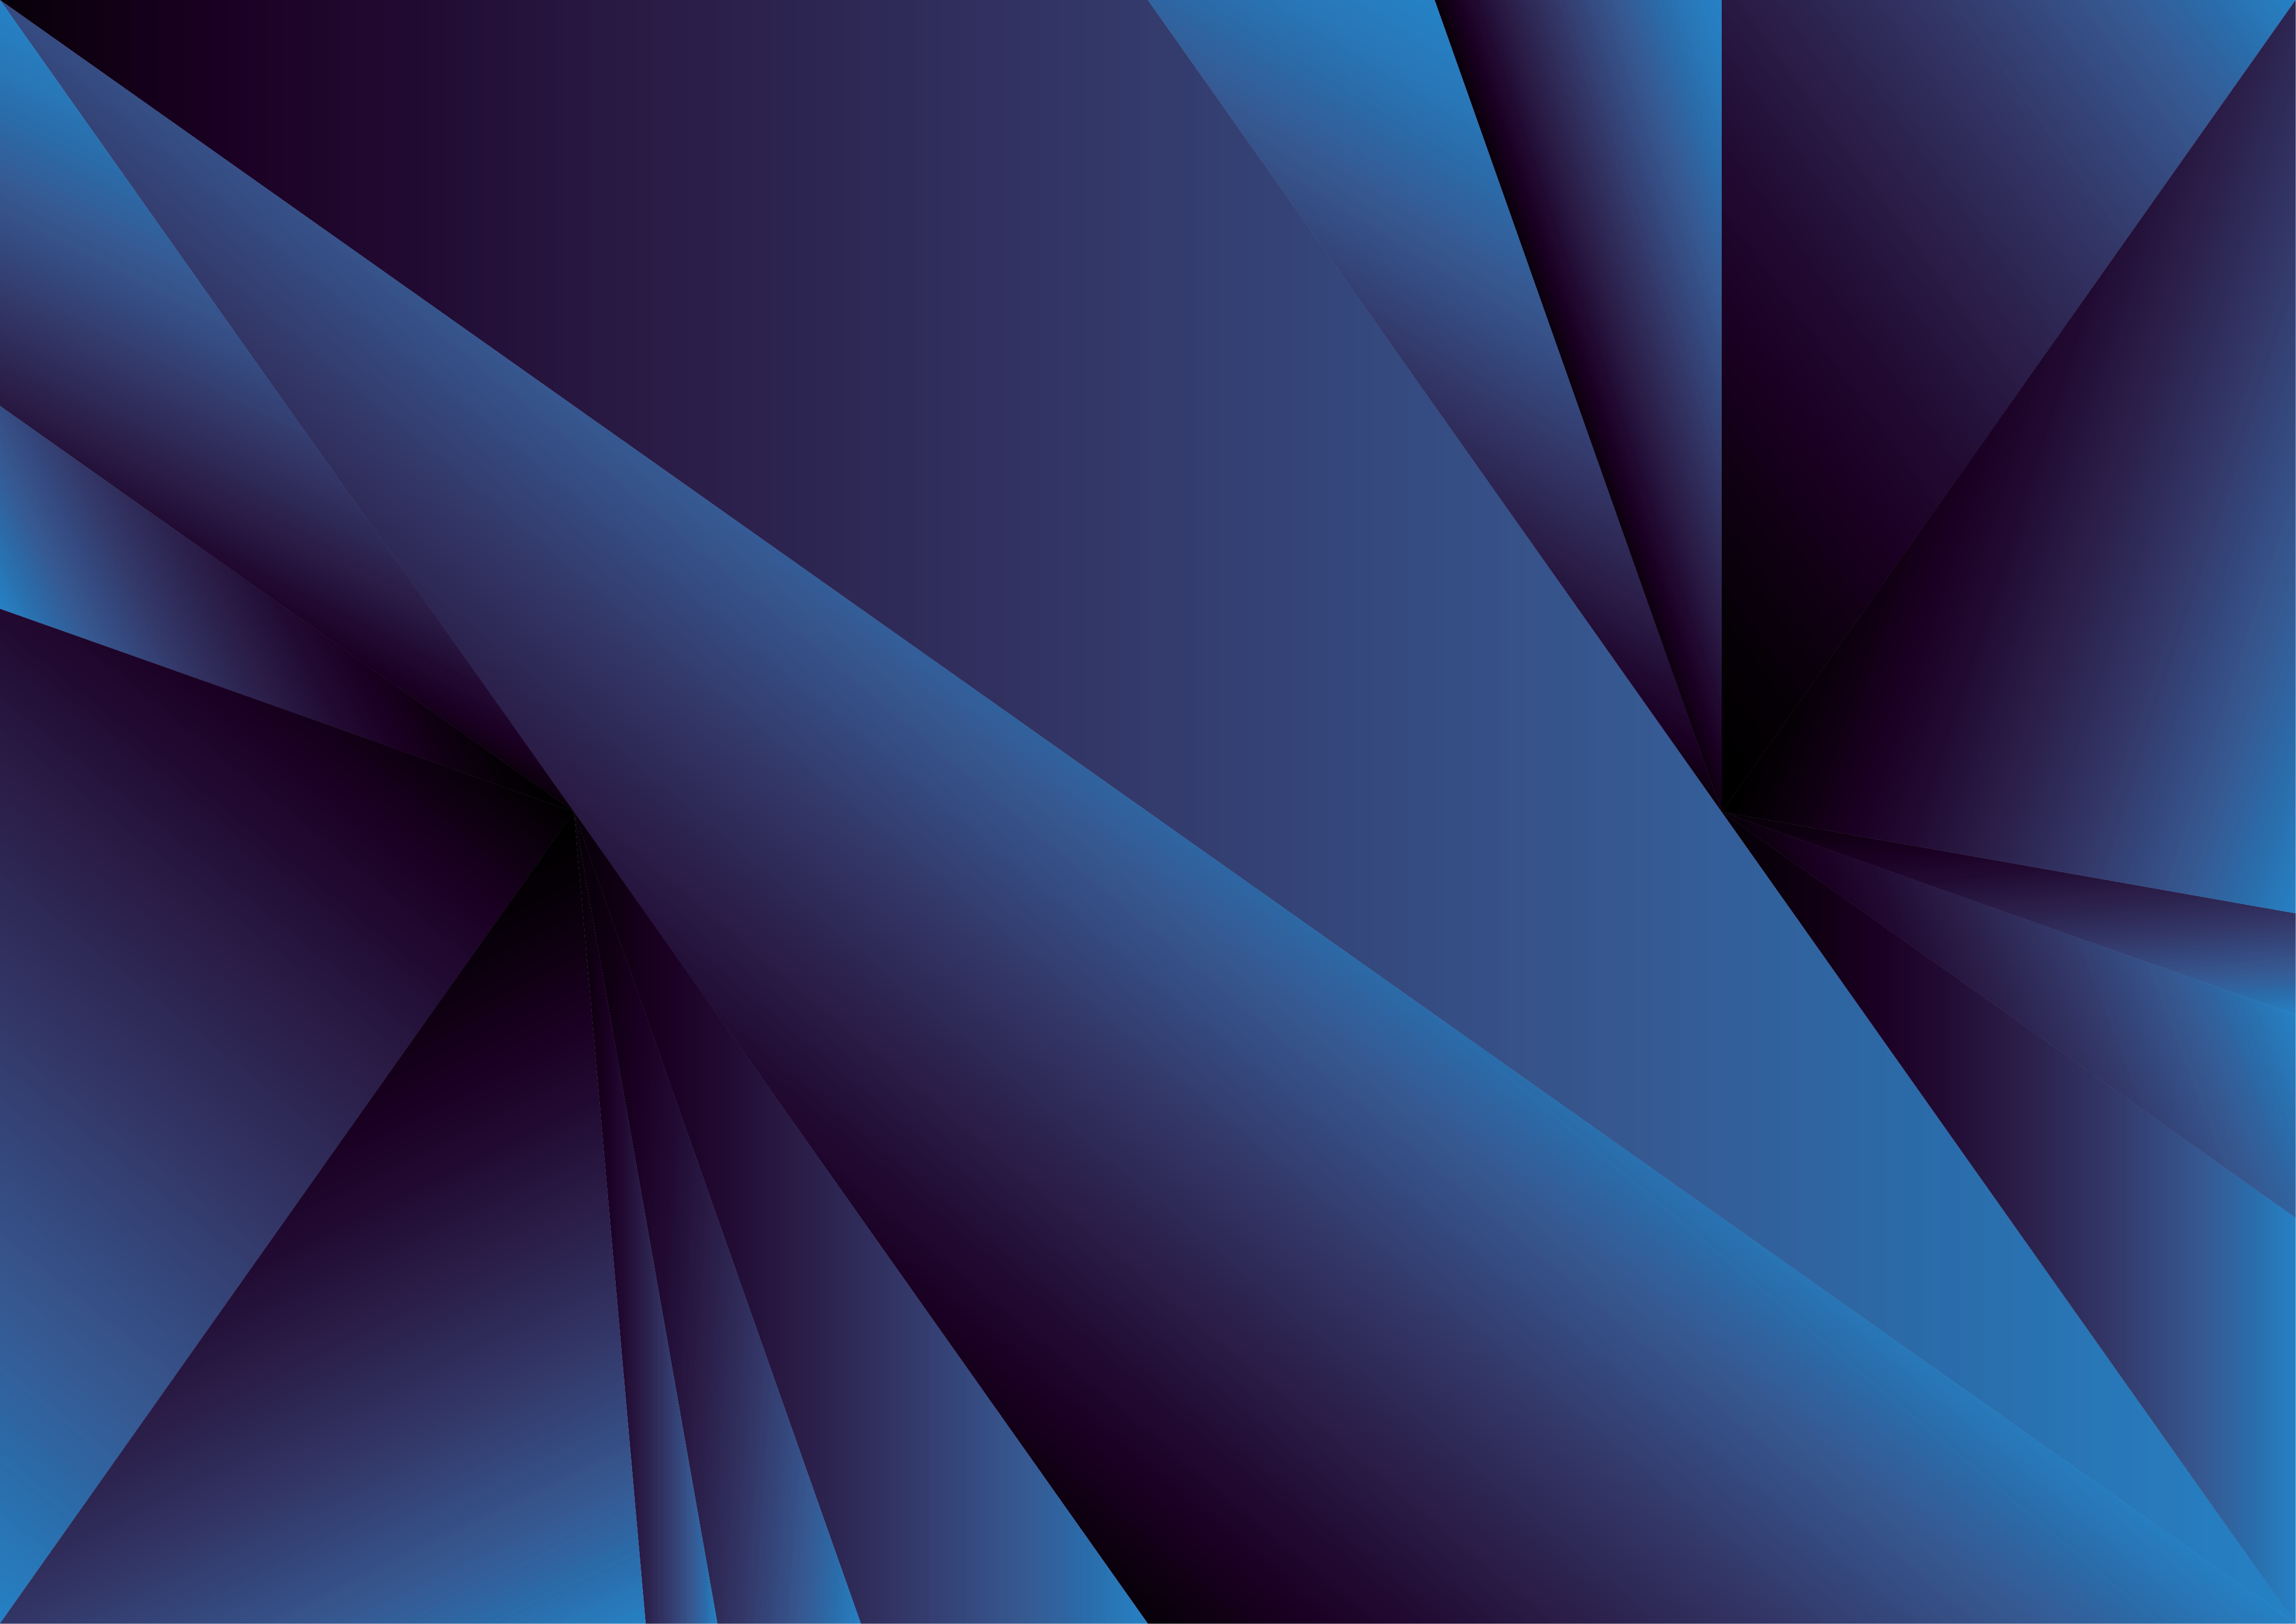 Blue Geometry Shapes 2021 Art Wallpaper, HD Abstract 4K Wallpapers ...